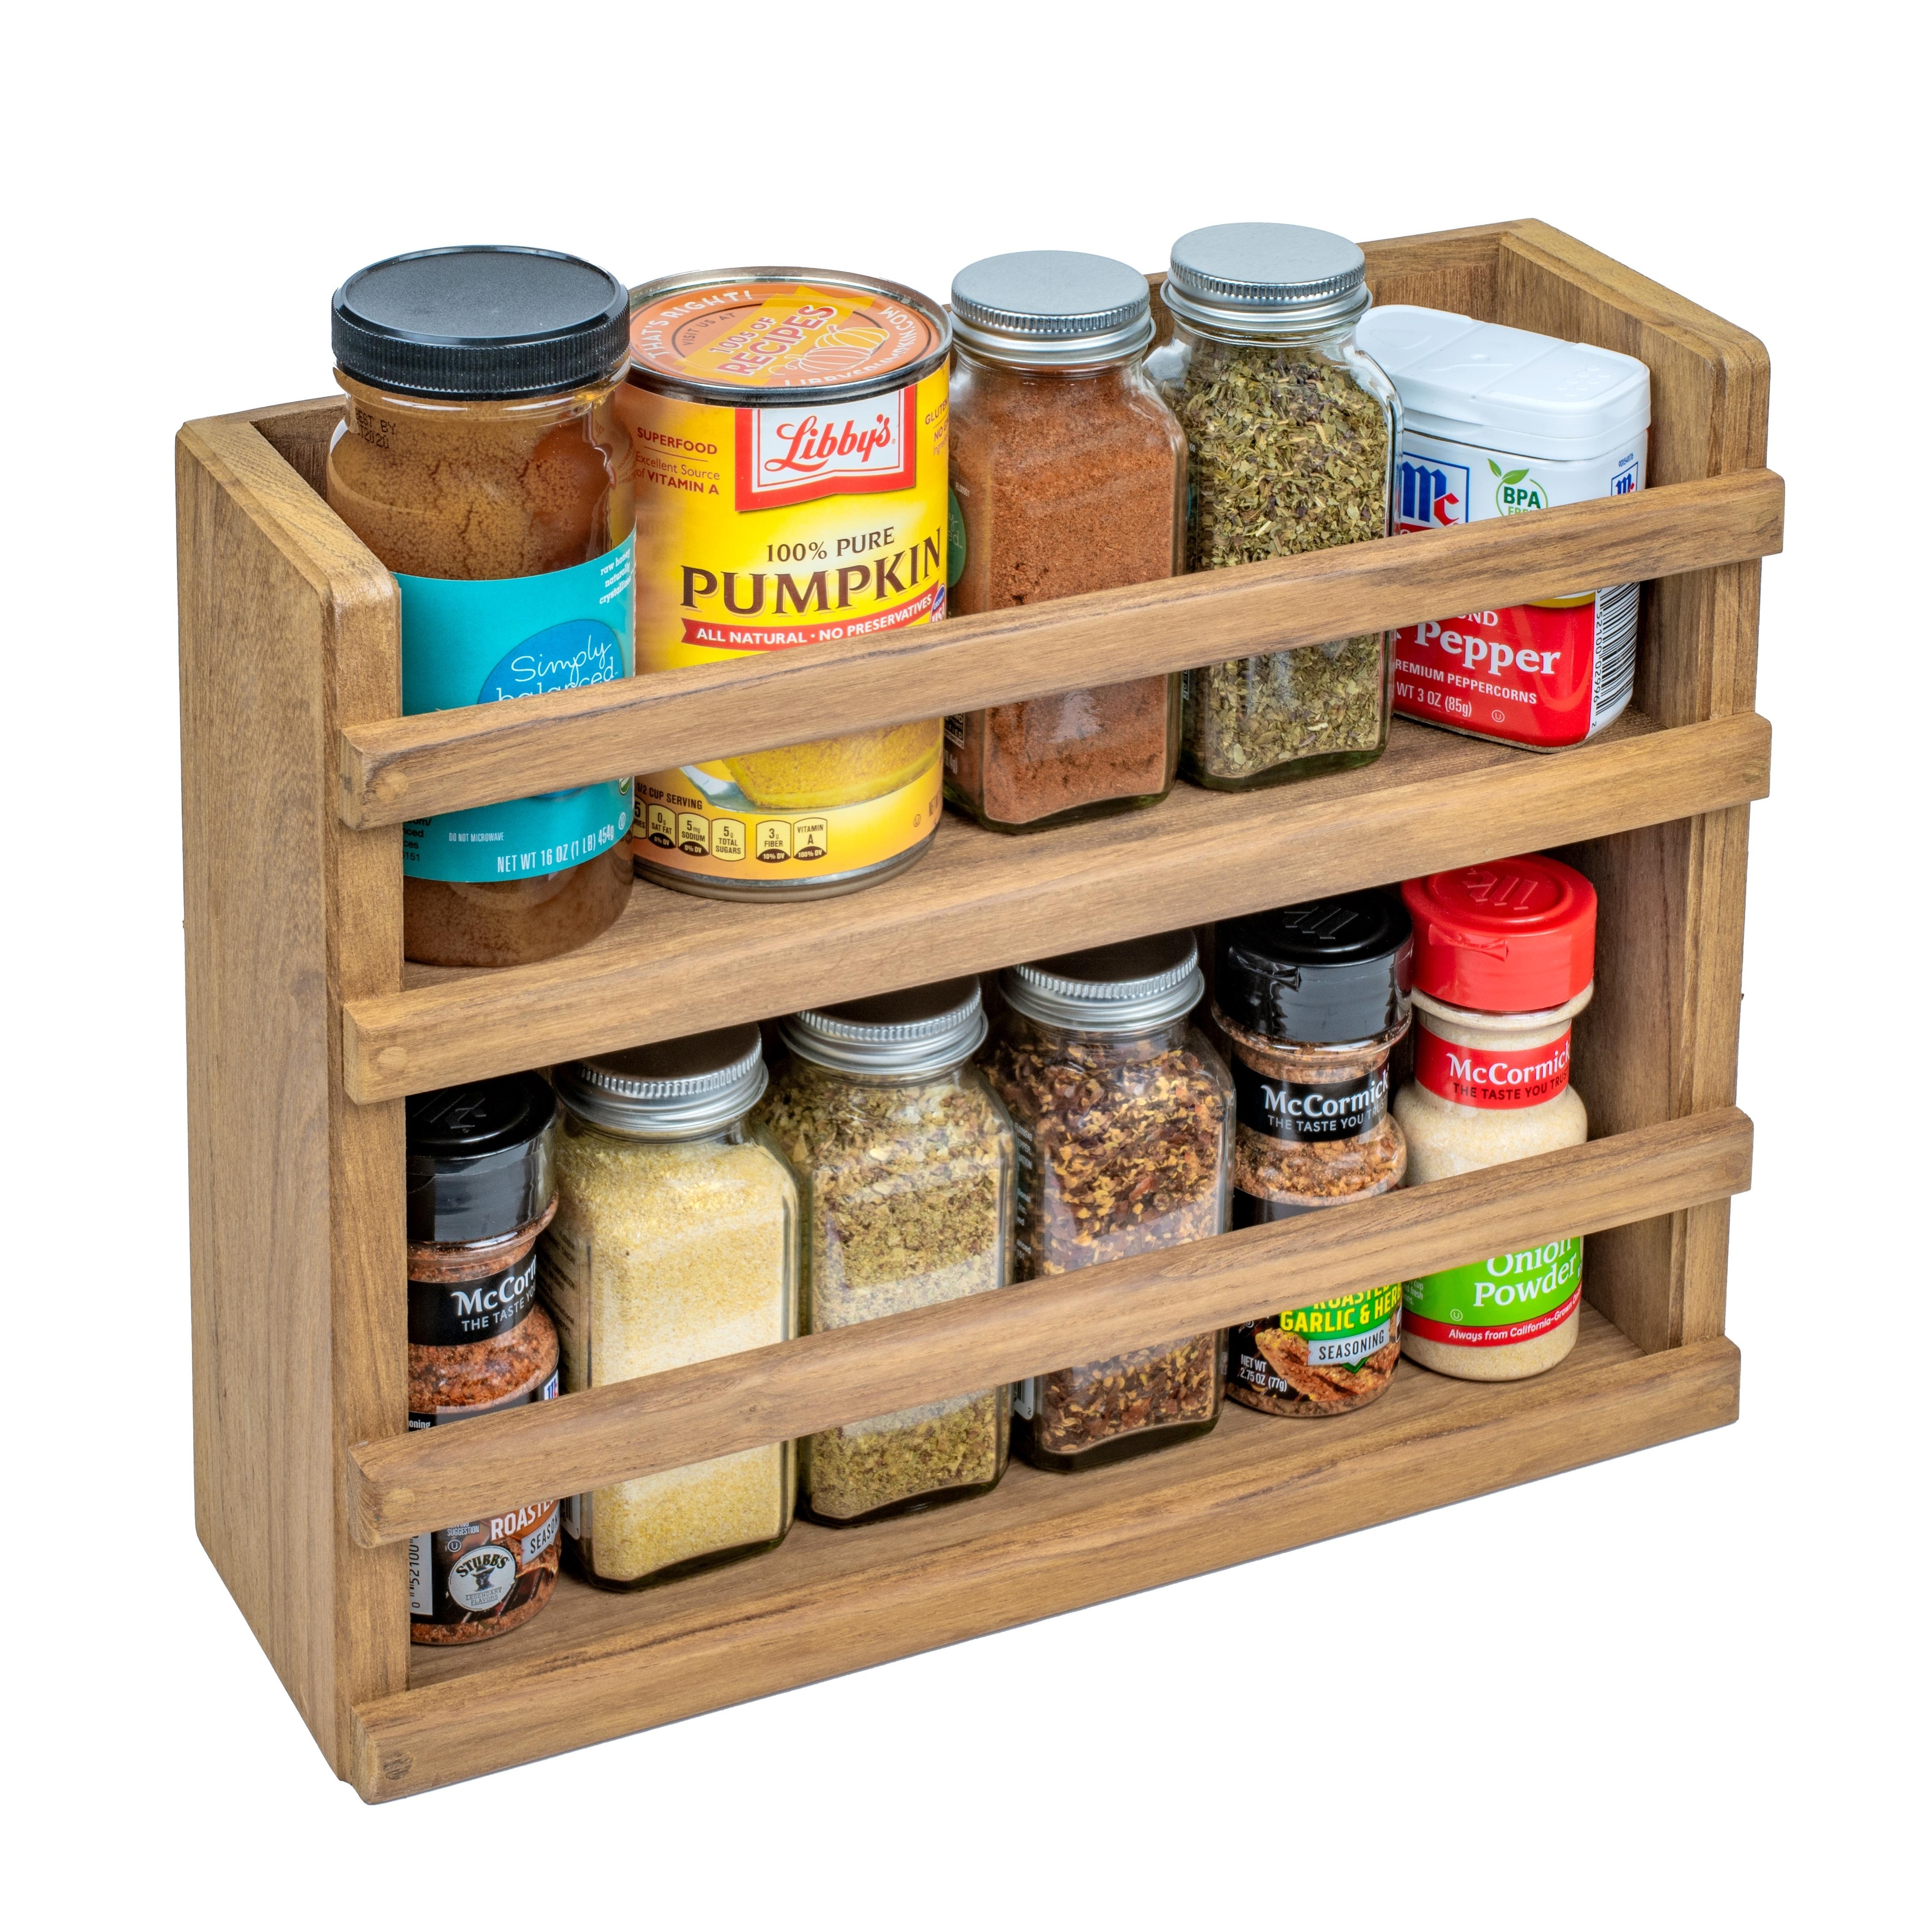 https://ak1.ostkcdn.com/images/products/is/images/direct/03b62ad0cef65d7177f17c605084cf0b57bd372b/Two-Tier-Teak-Spice-Rack.jpg